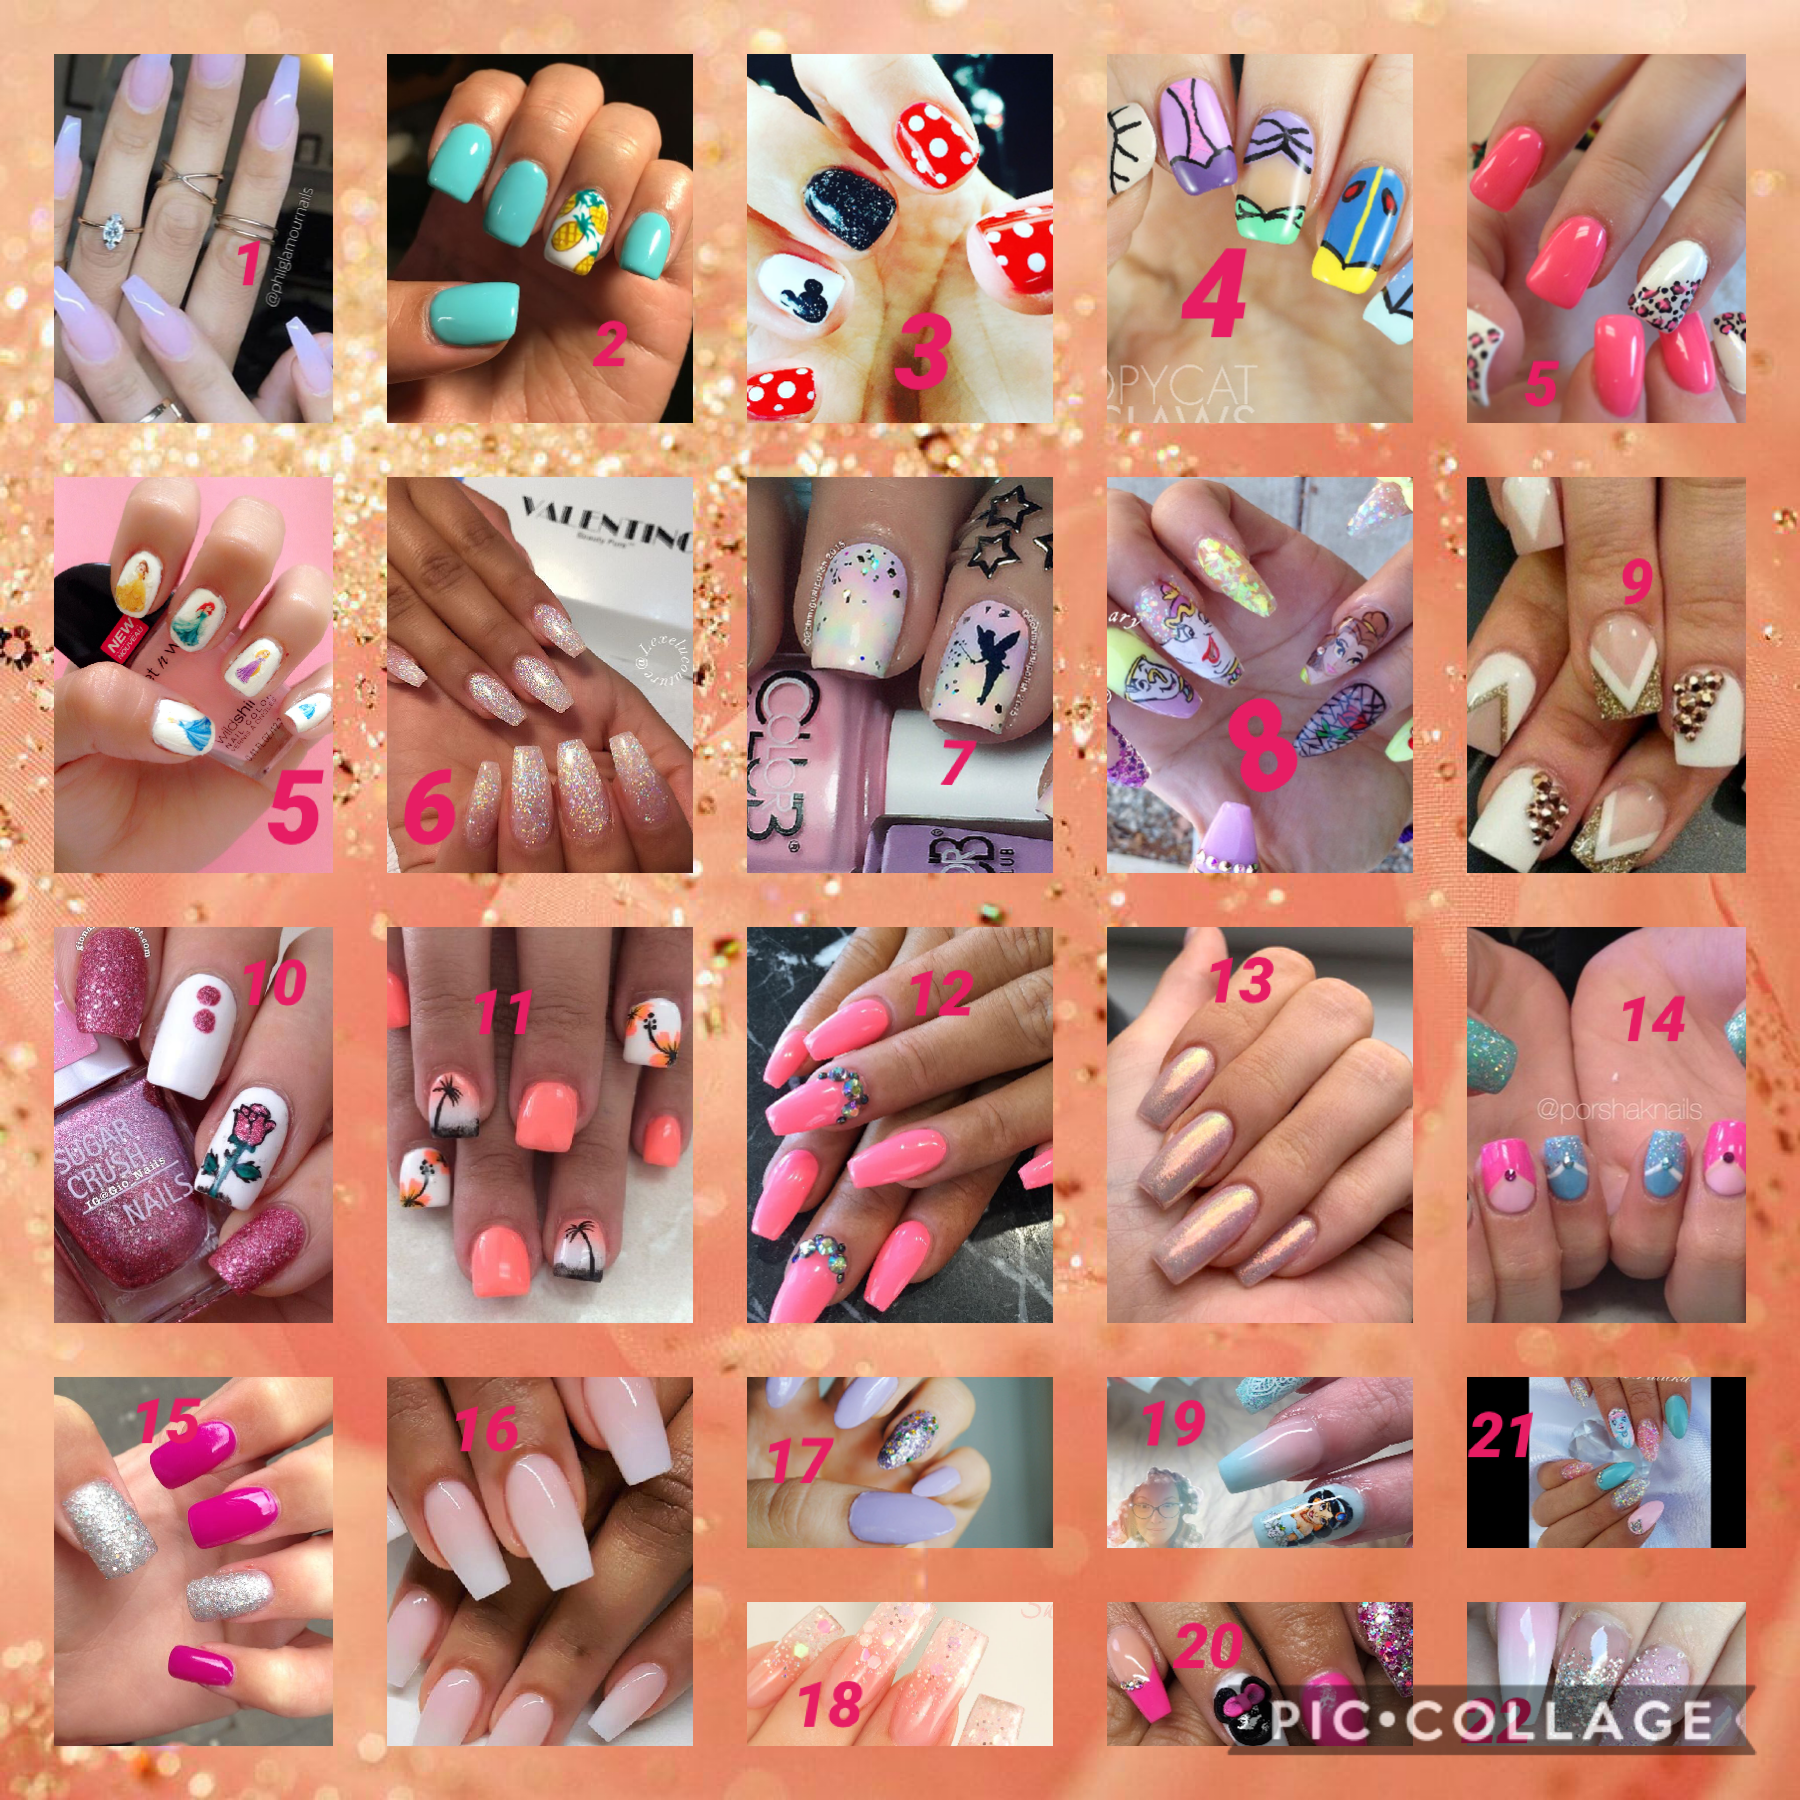 Plz vote on which nails u like best 😆